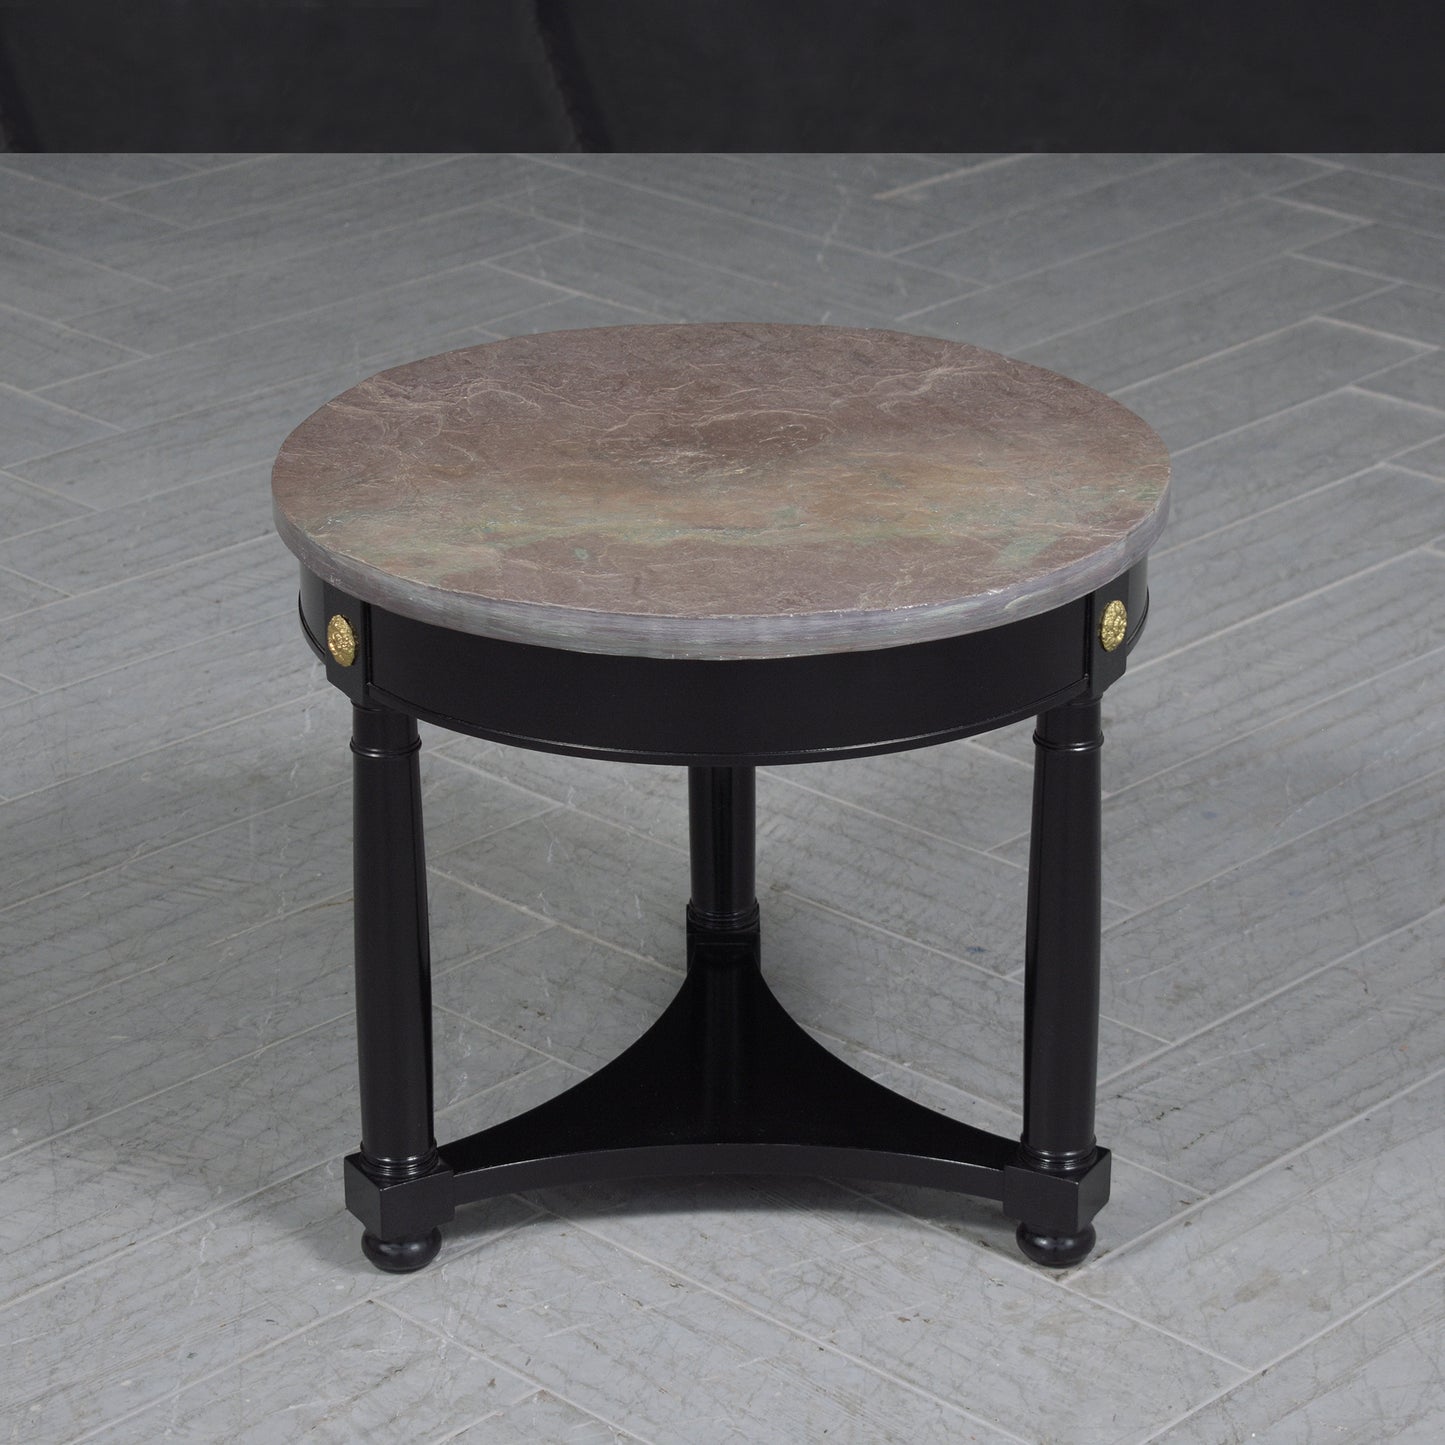 Vintage Regency-Style Round Side Table with Grey Marble Top & Brass Accents